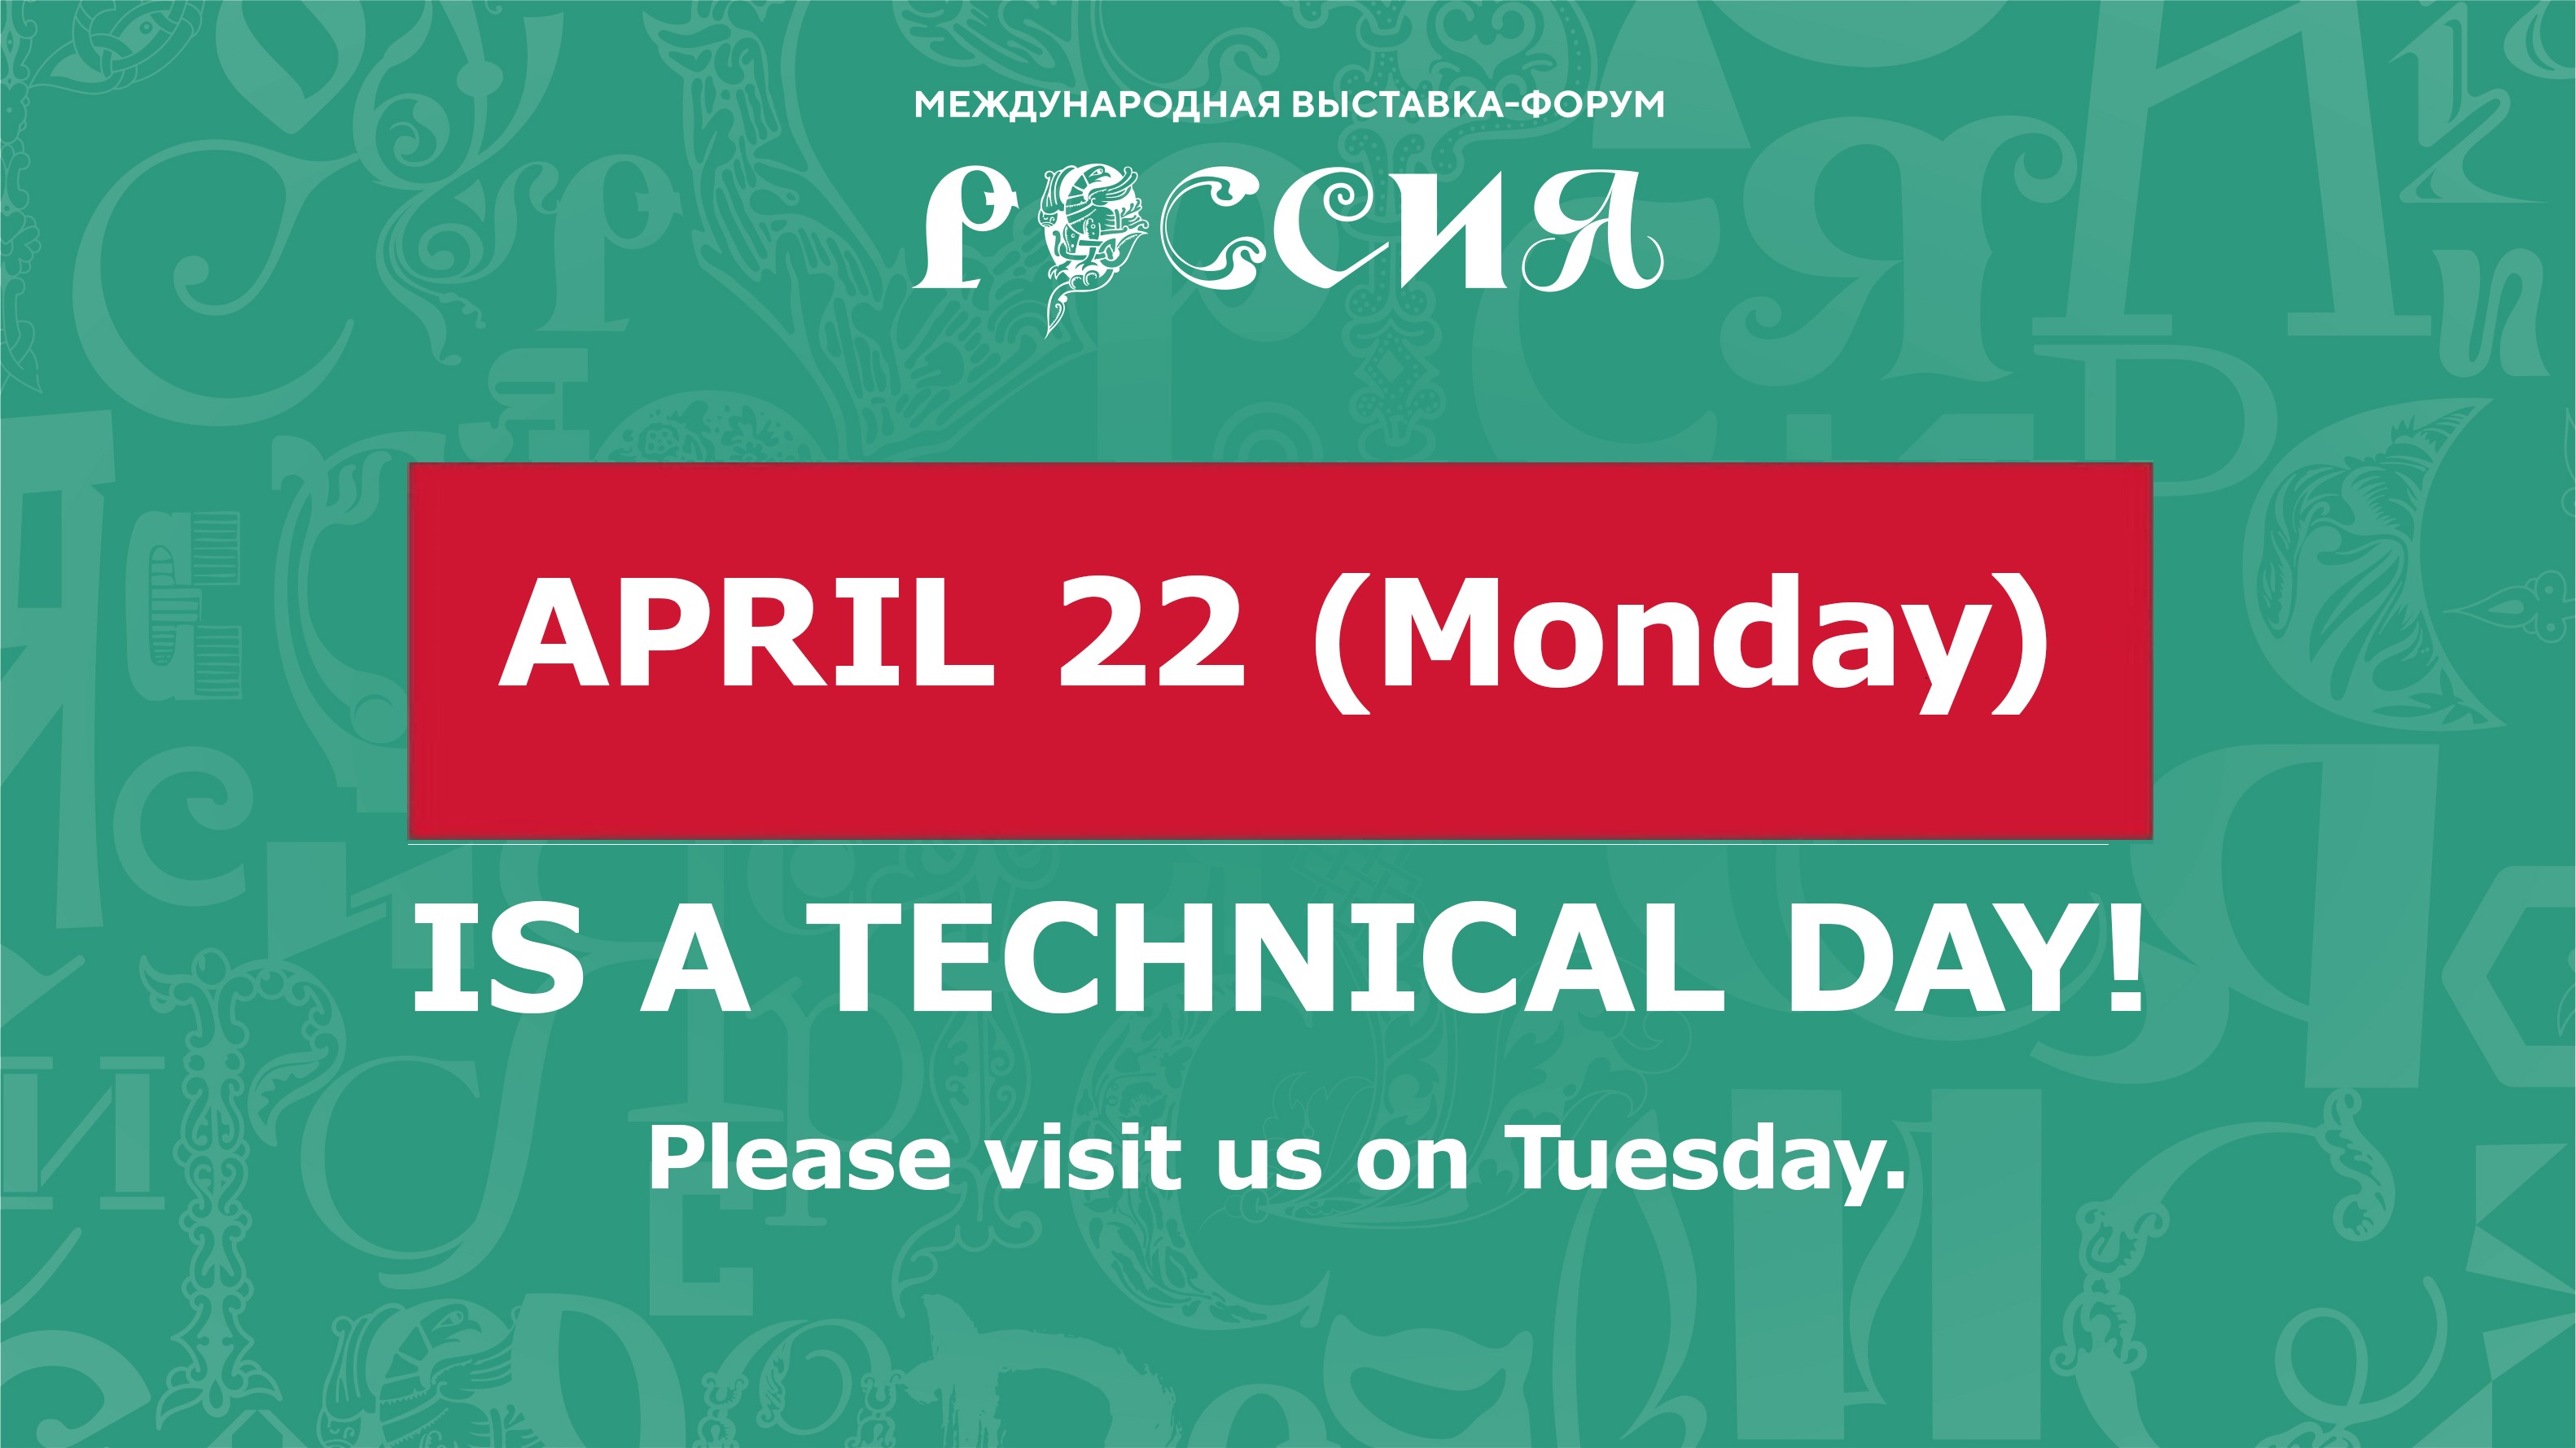 Dear guests! Monday, April 22, is a technical day at the RUSSIA EXPO.